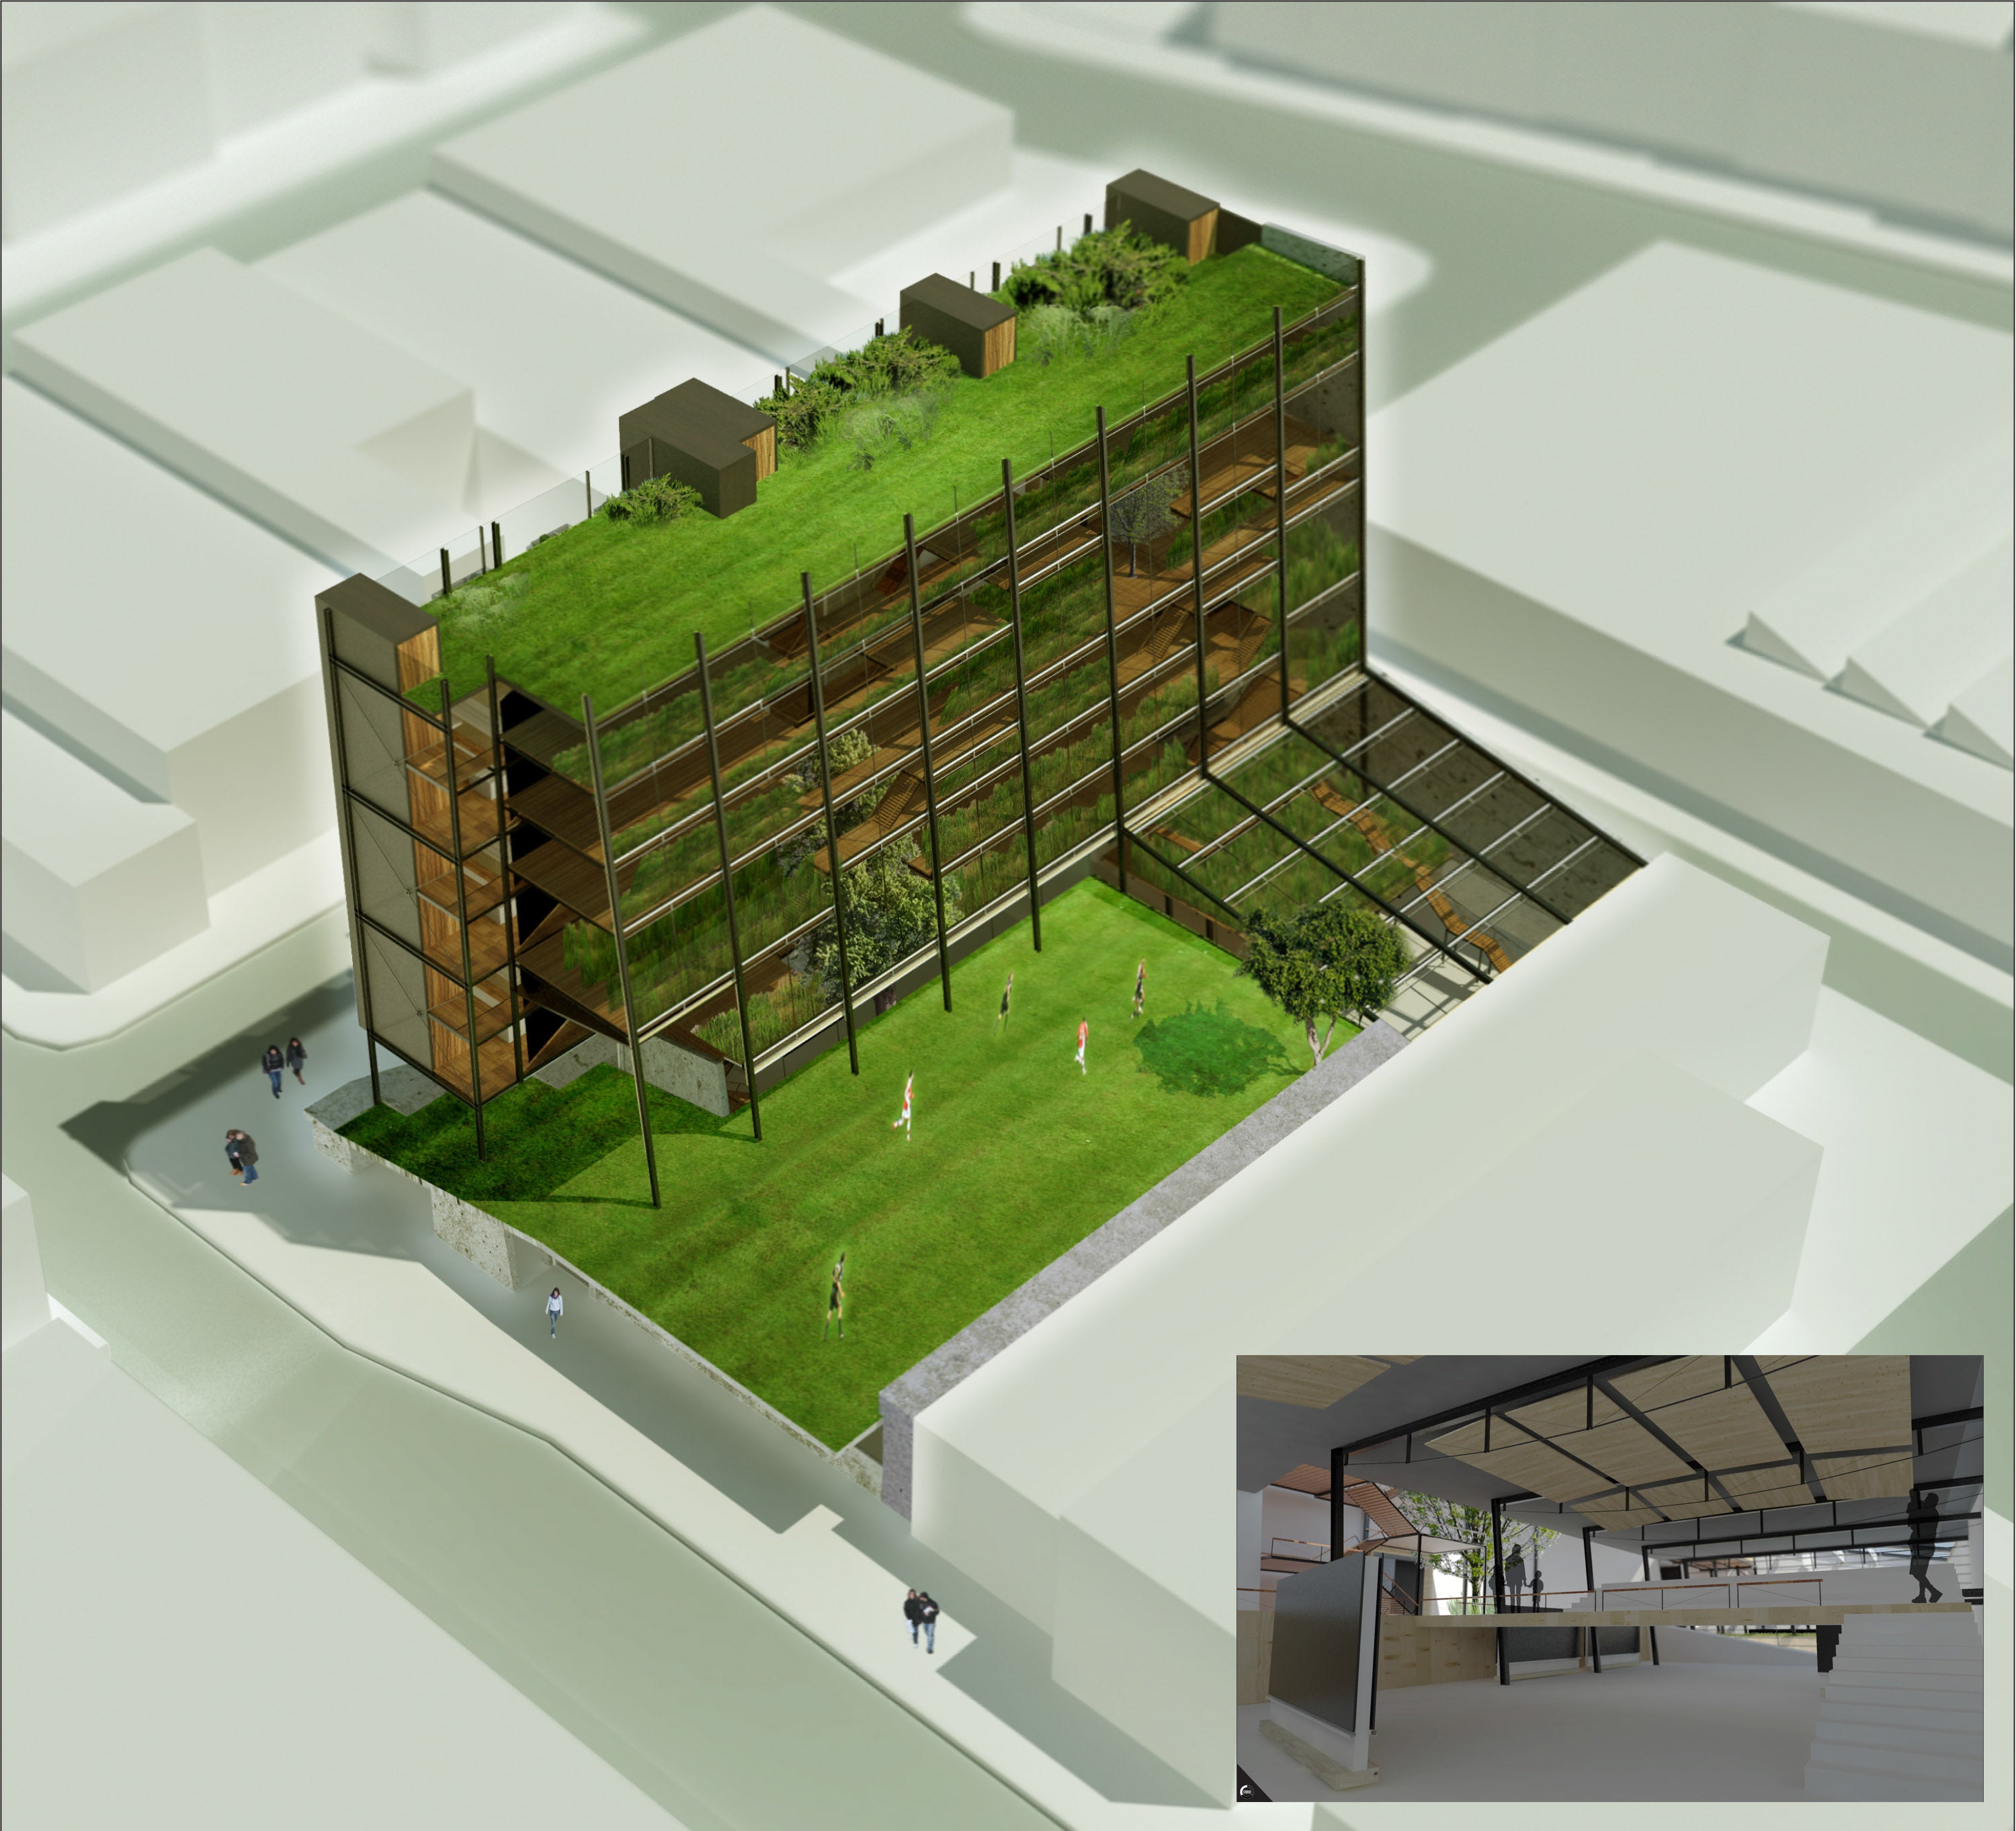 An aerial perspective render of the building.